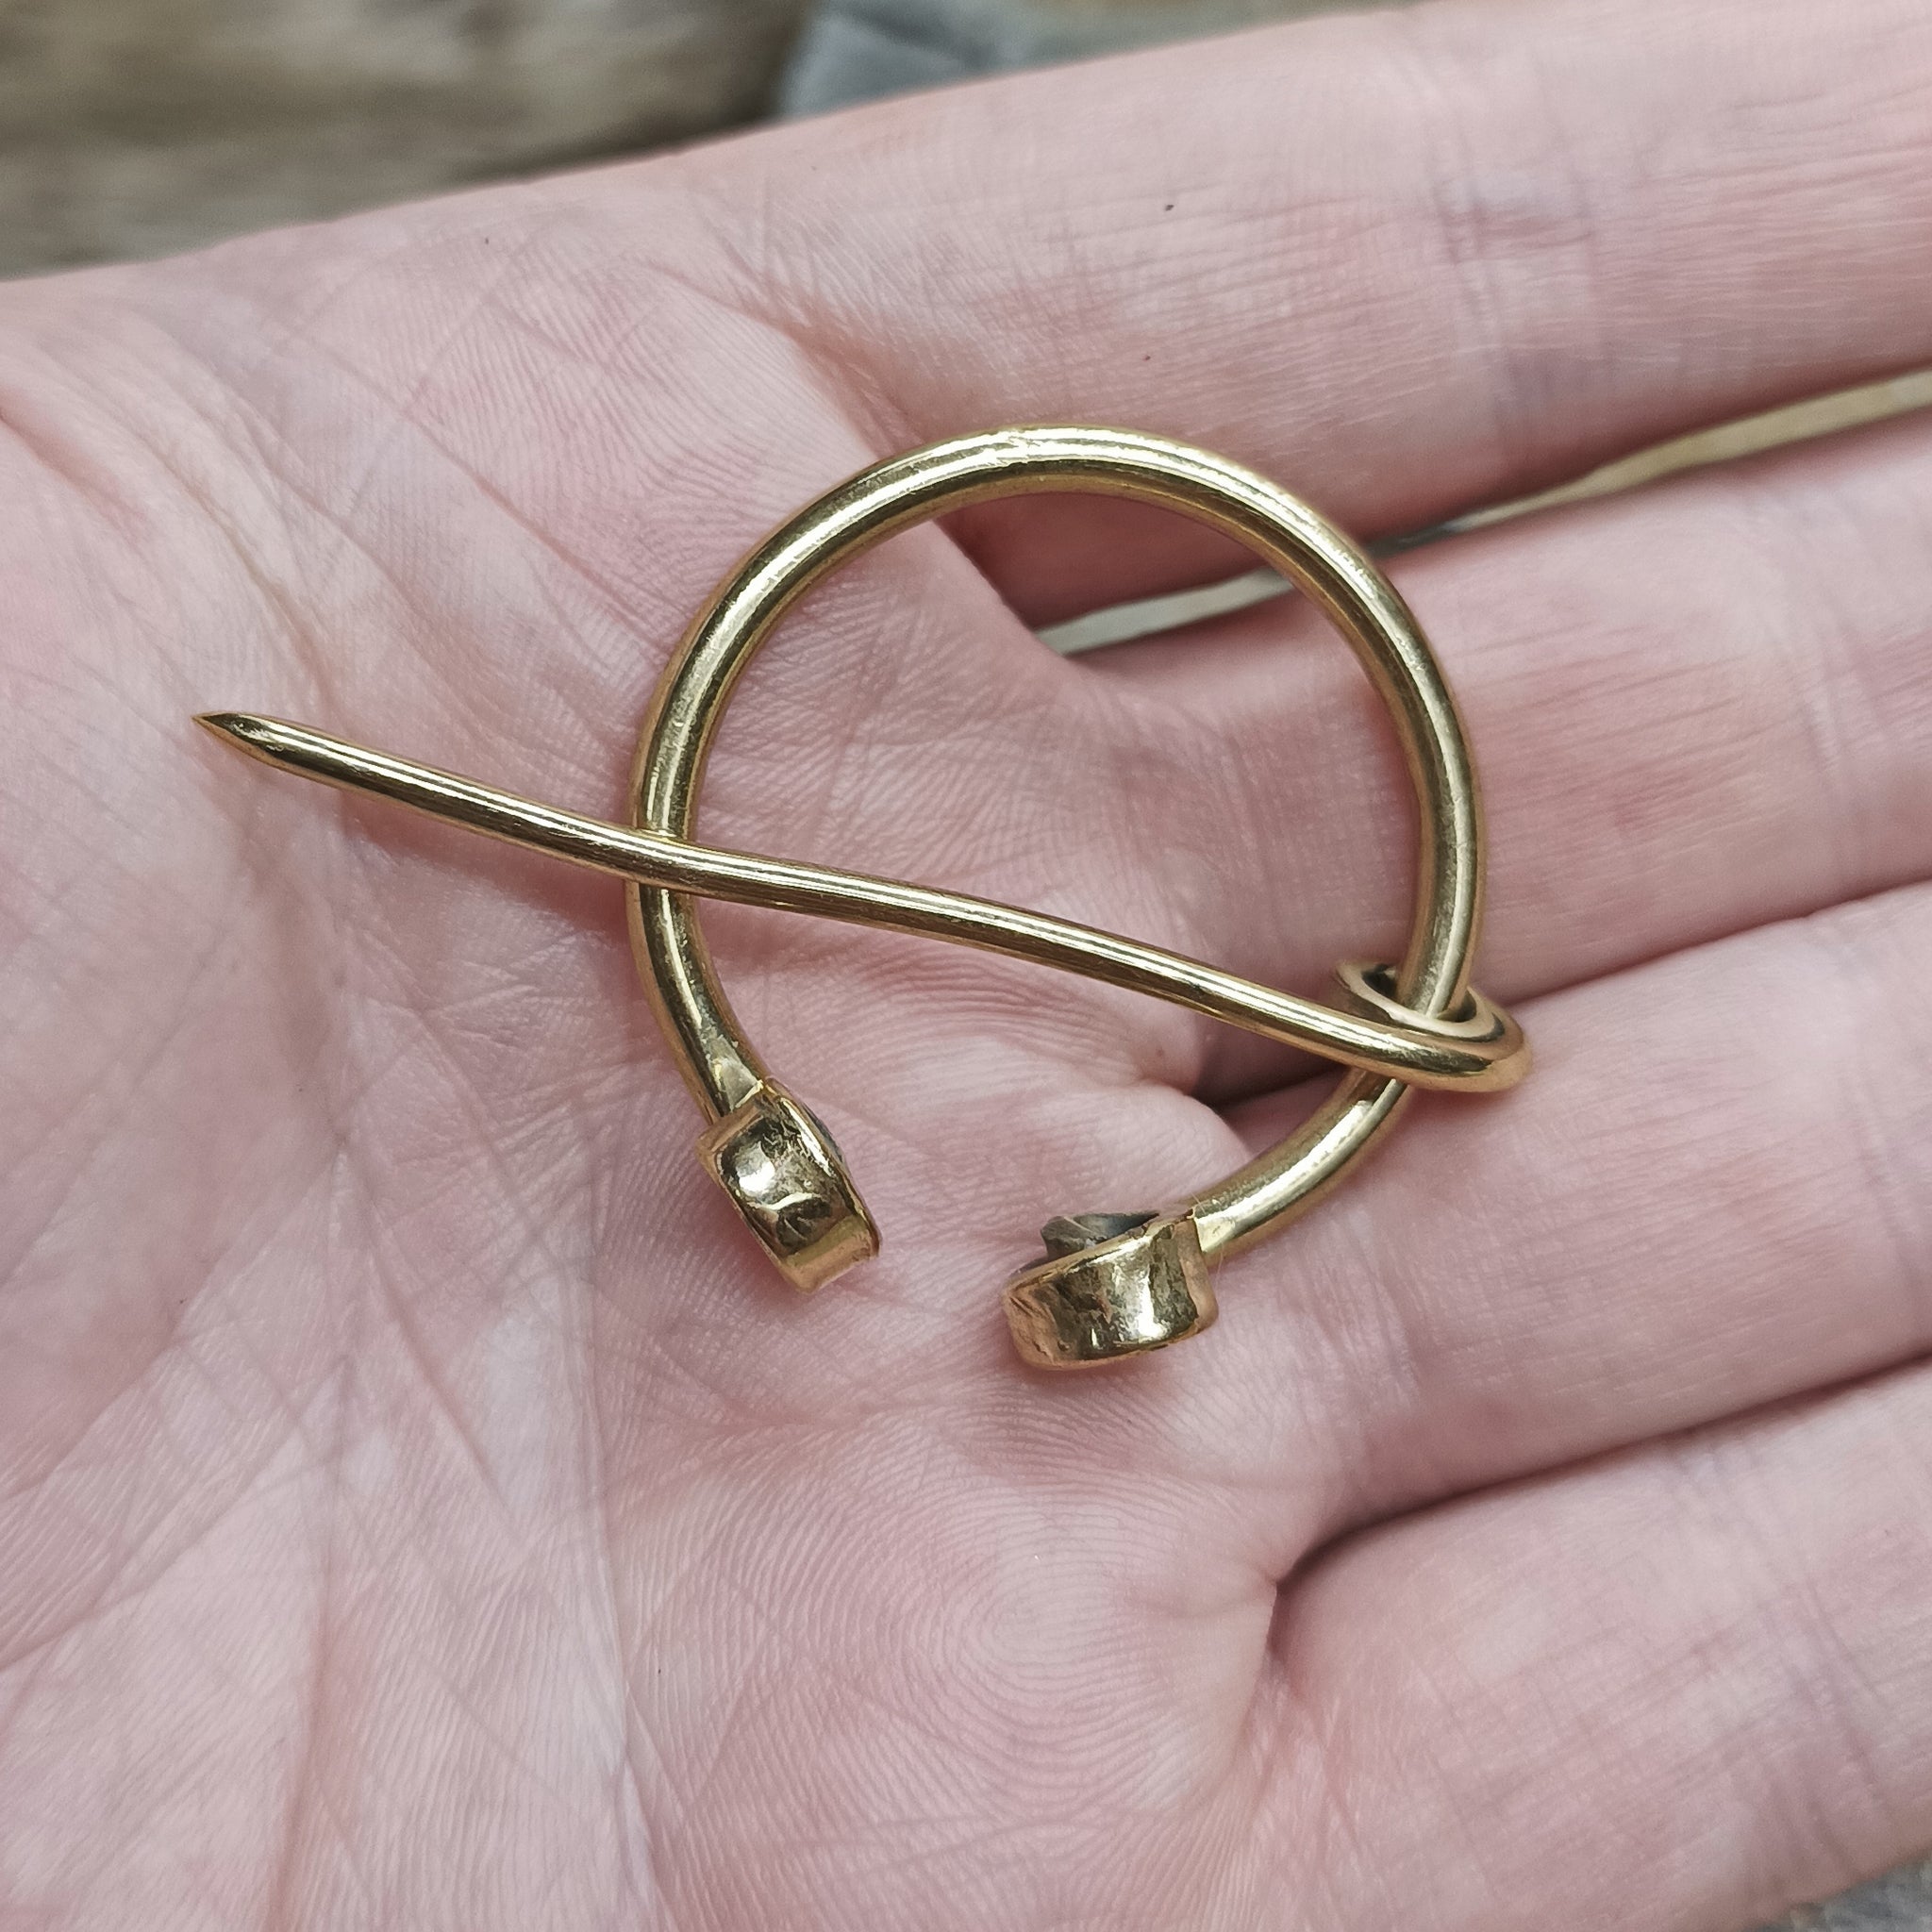 30mm Brass Cloak Pin / Clothes Pin on Hand